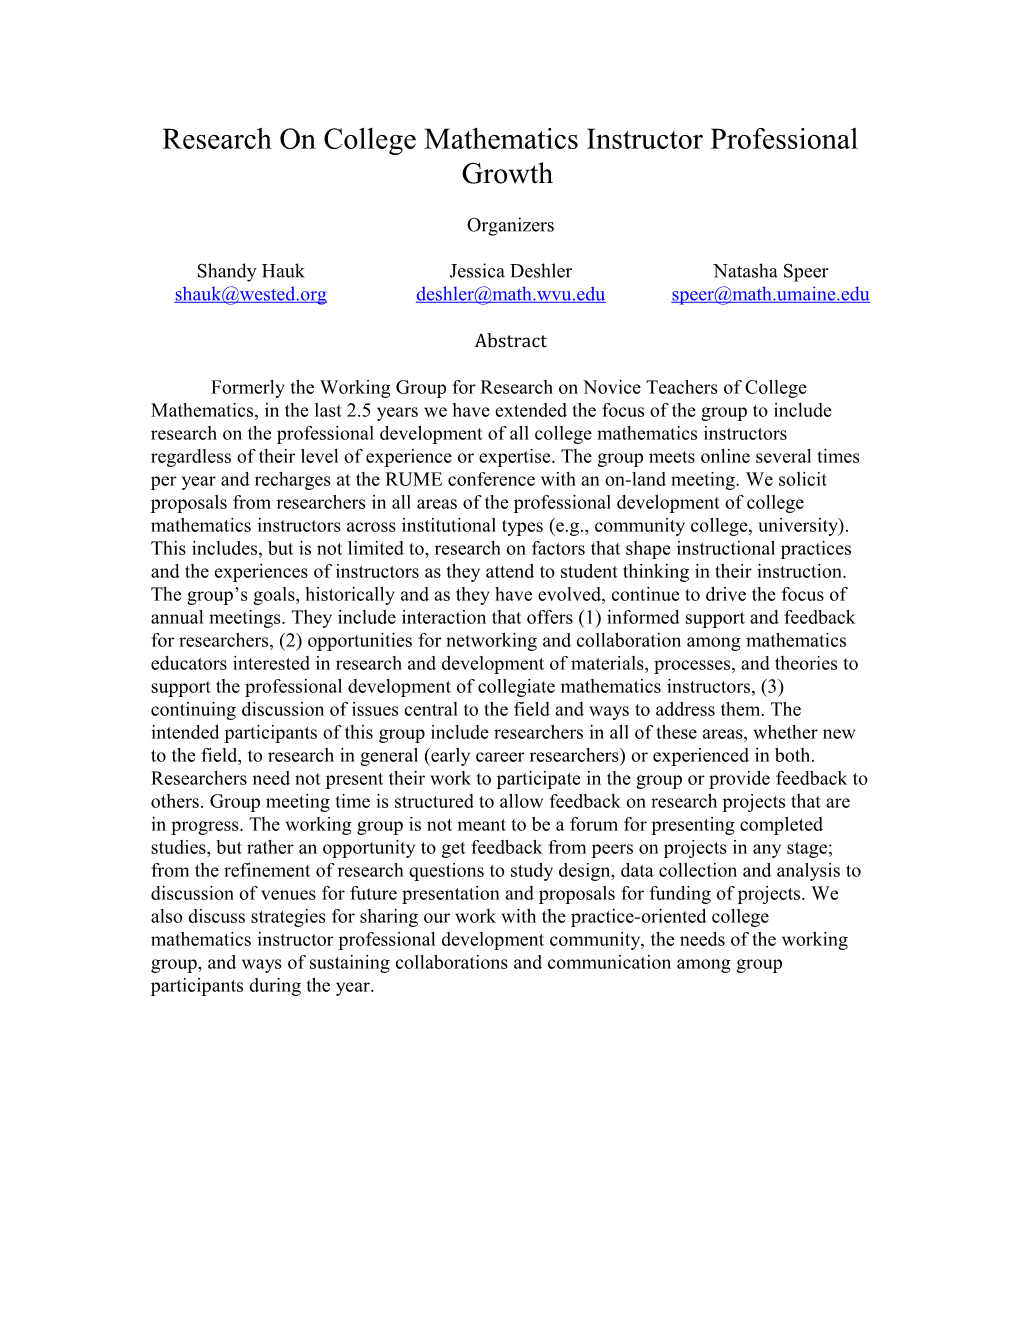 Research on College Mathematics Instructor Professional Growth